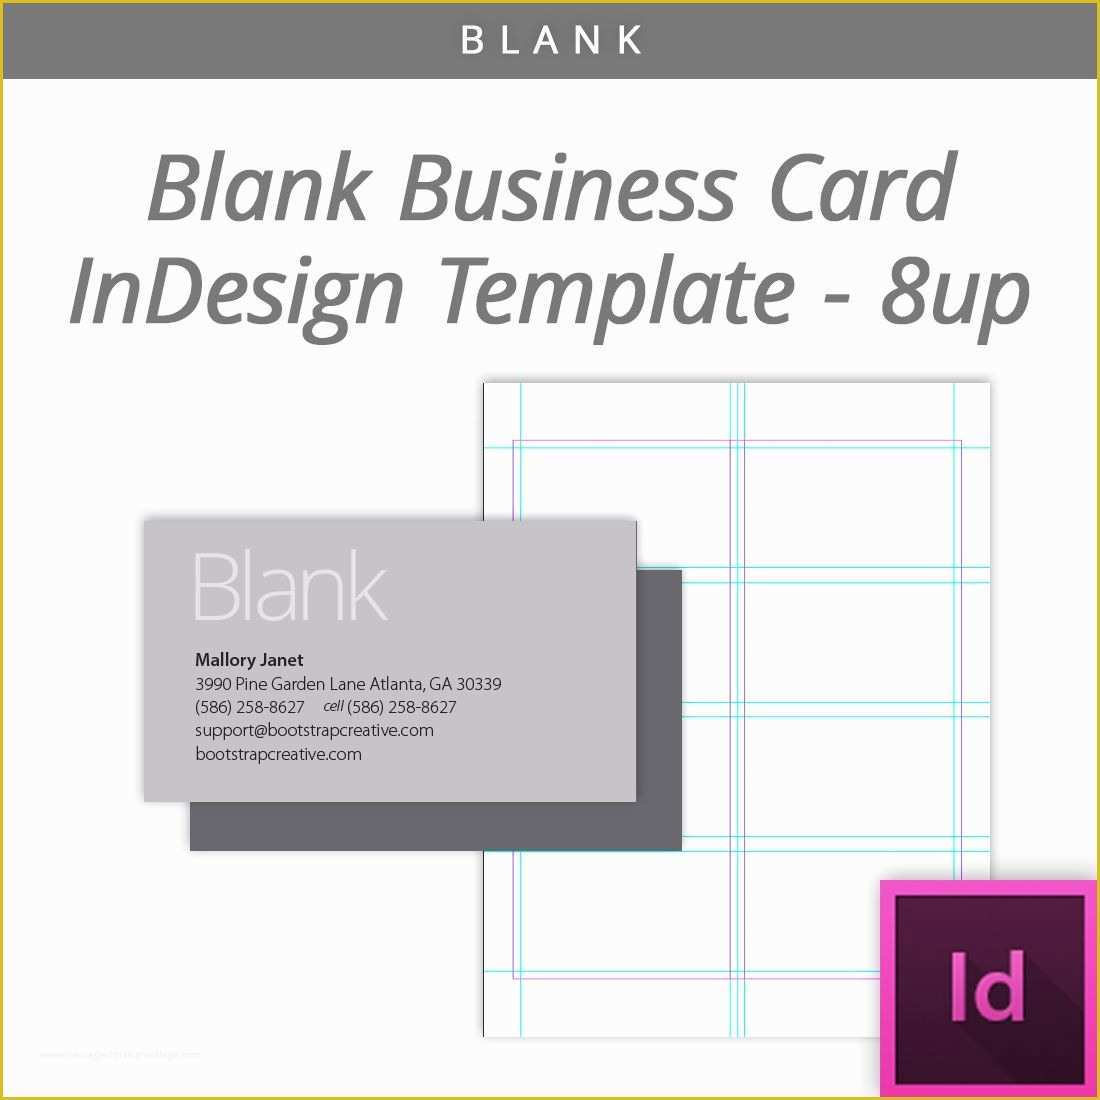 Adobe Business Card Template Free Of Blank Indesign Business Card Template 8 Up Free Download